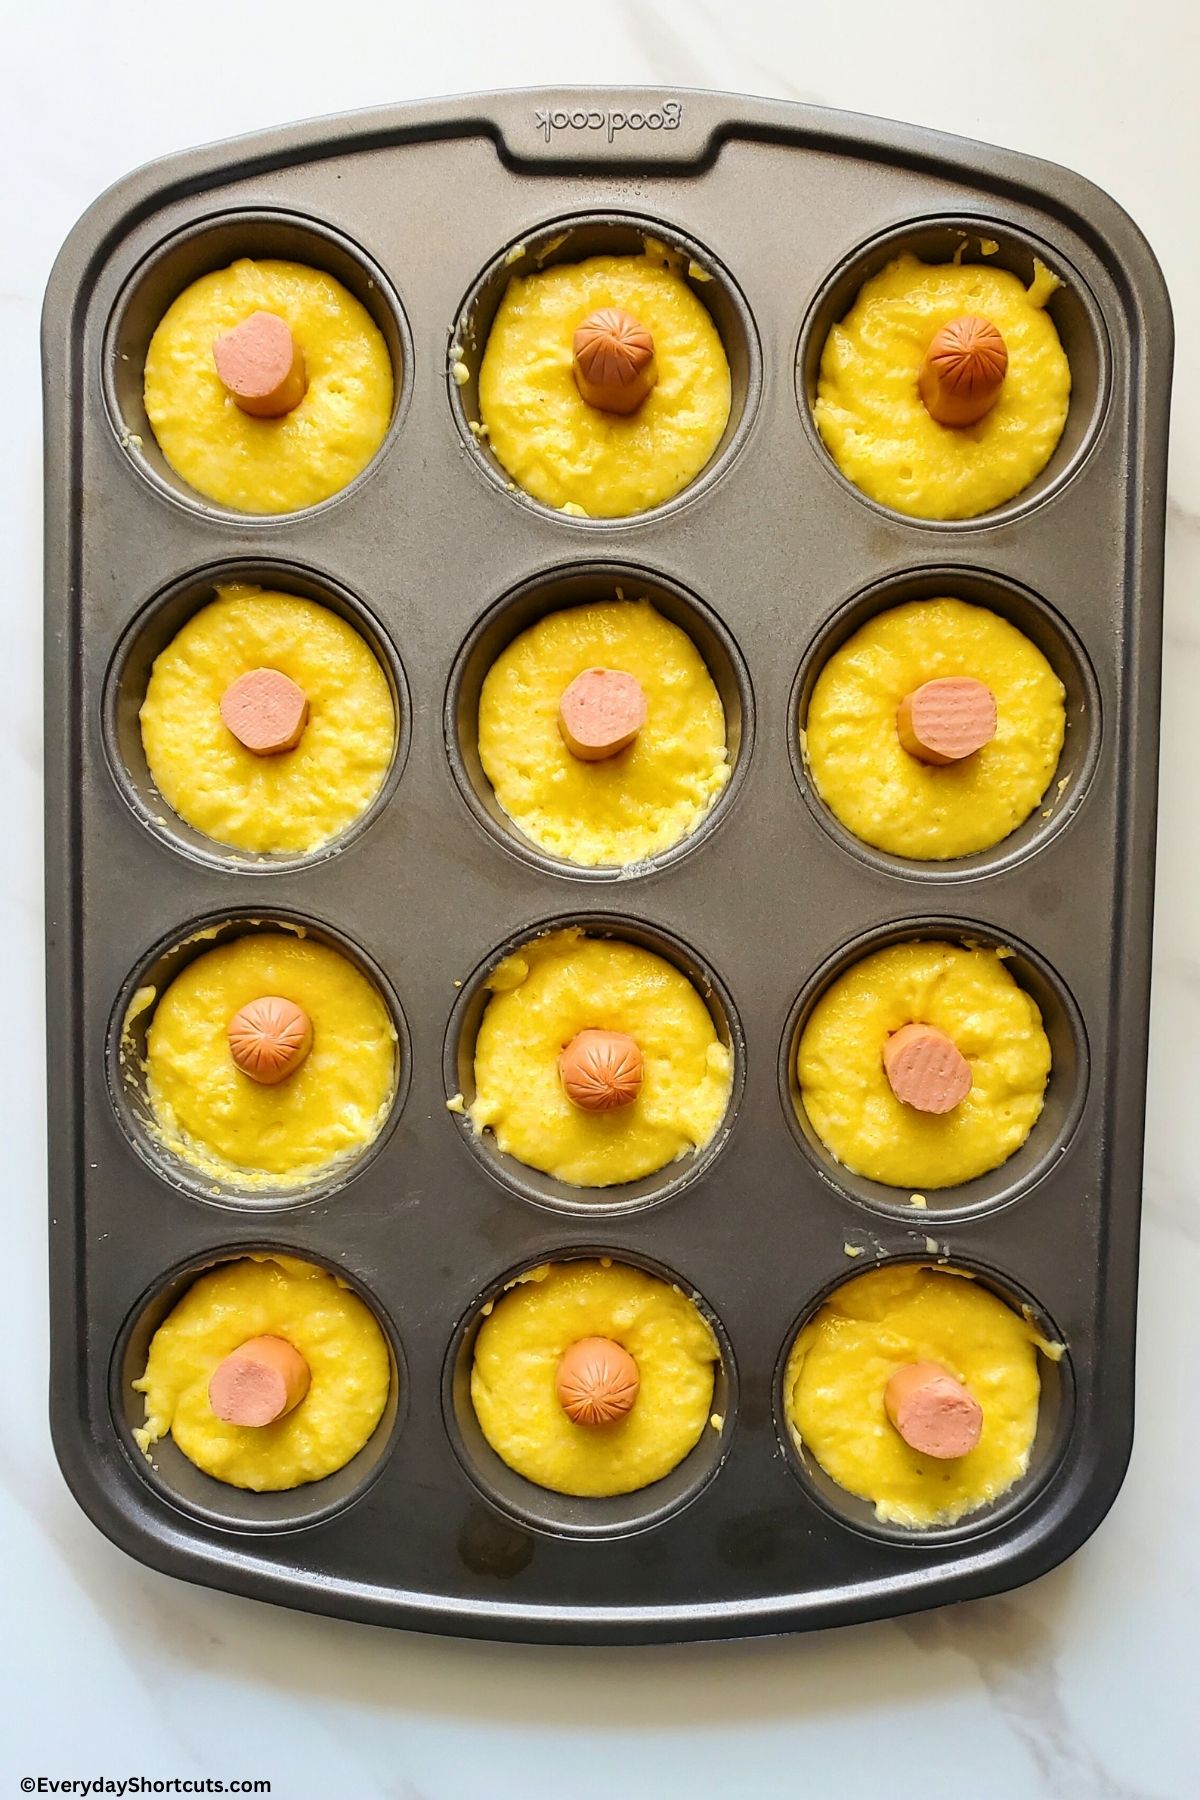 corn dog batter and hot dogs in a muffin tin